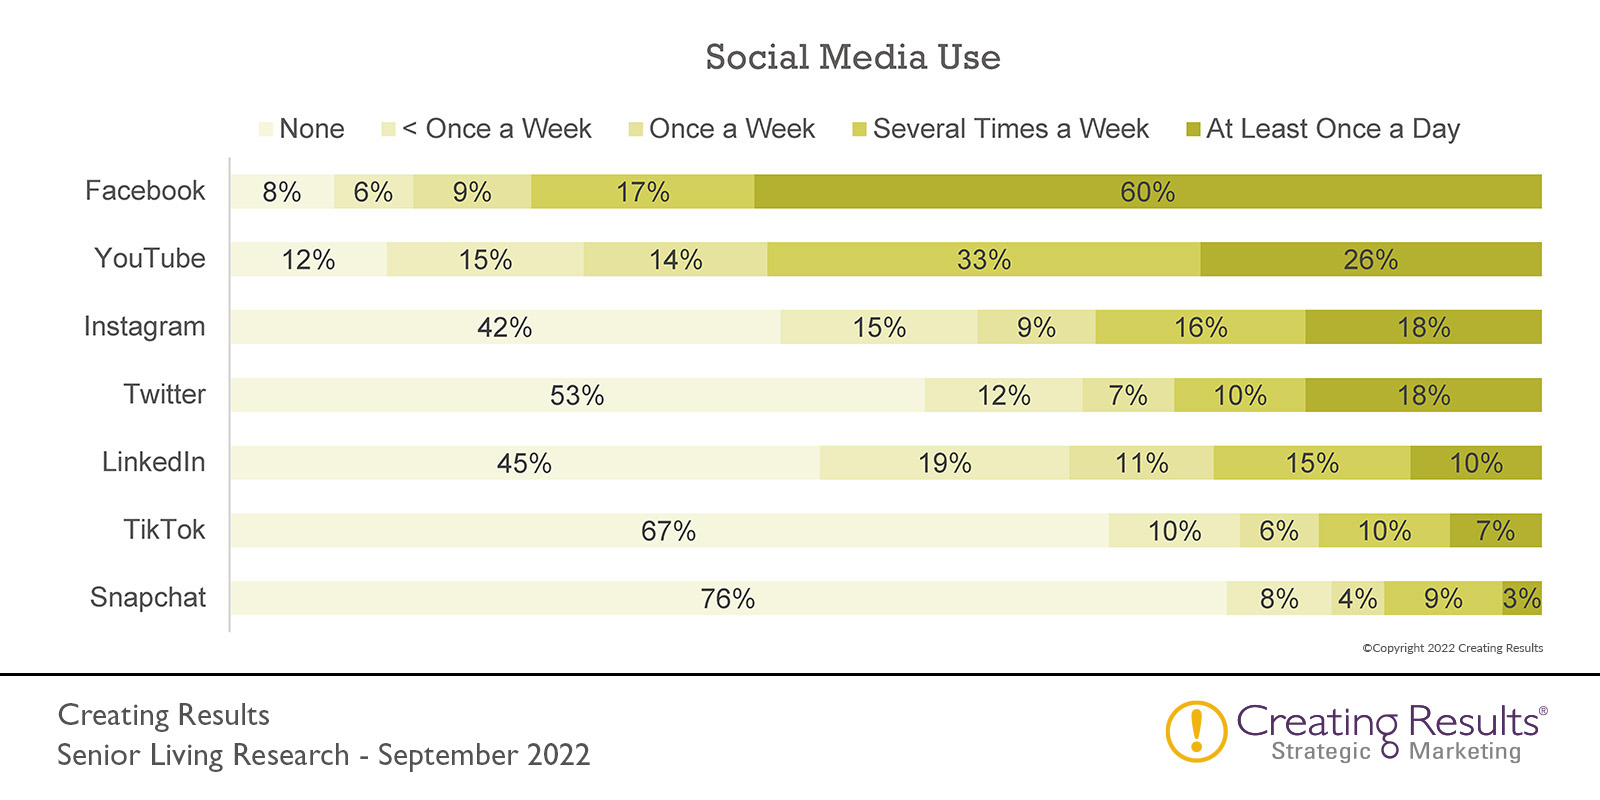 graph - Social-Media_Use by mature consumers 2022